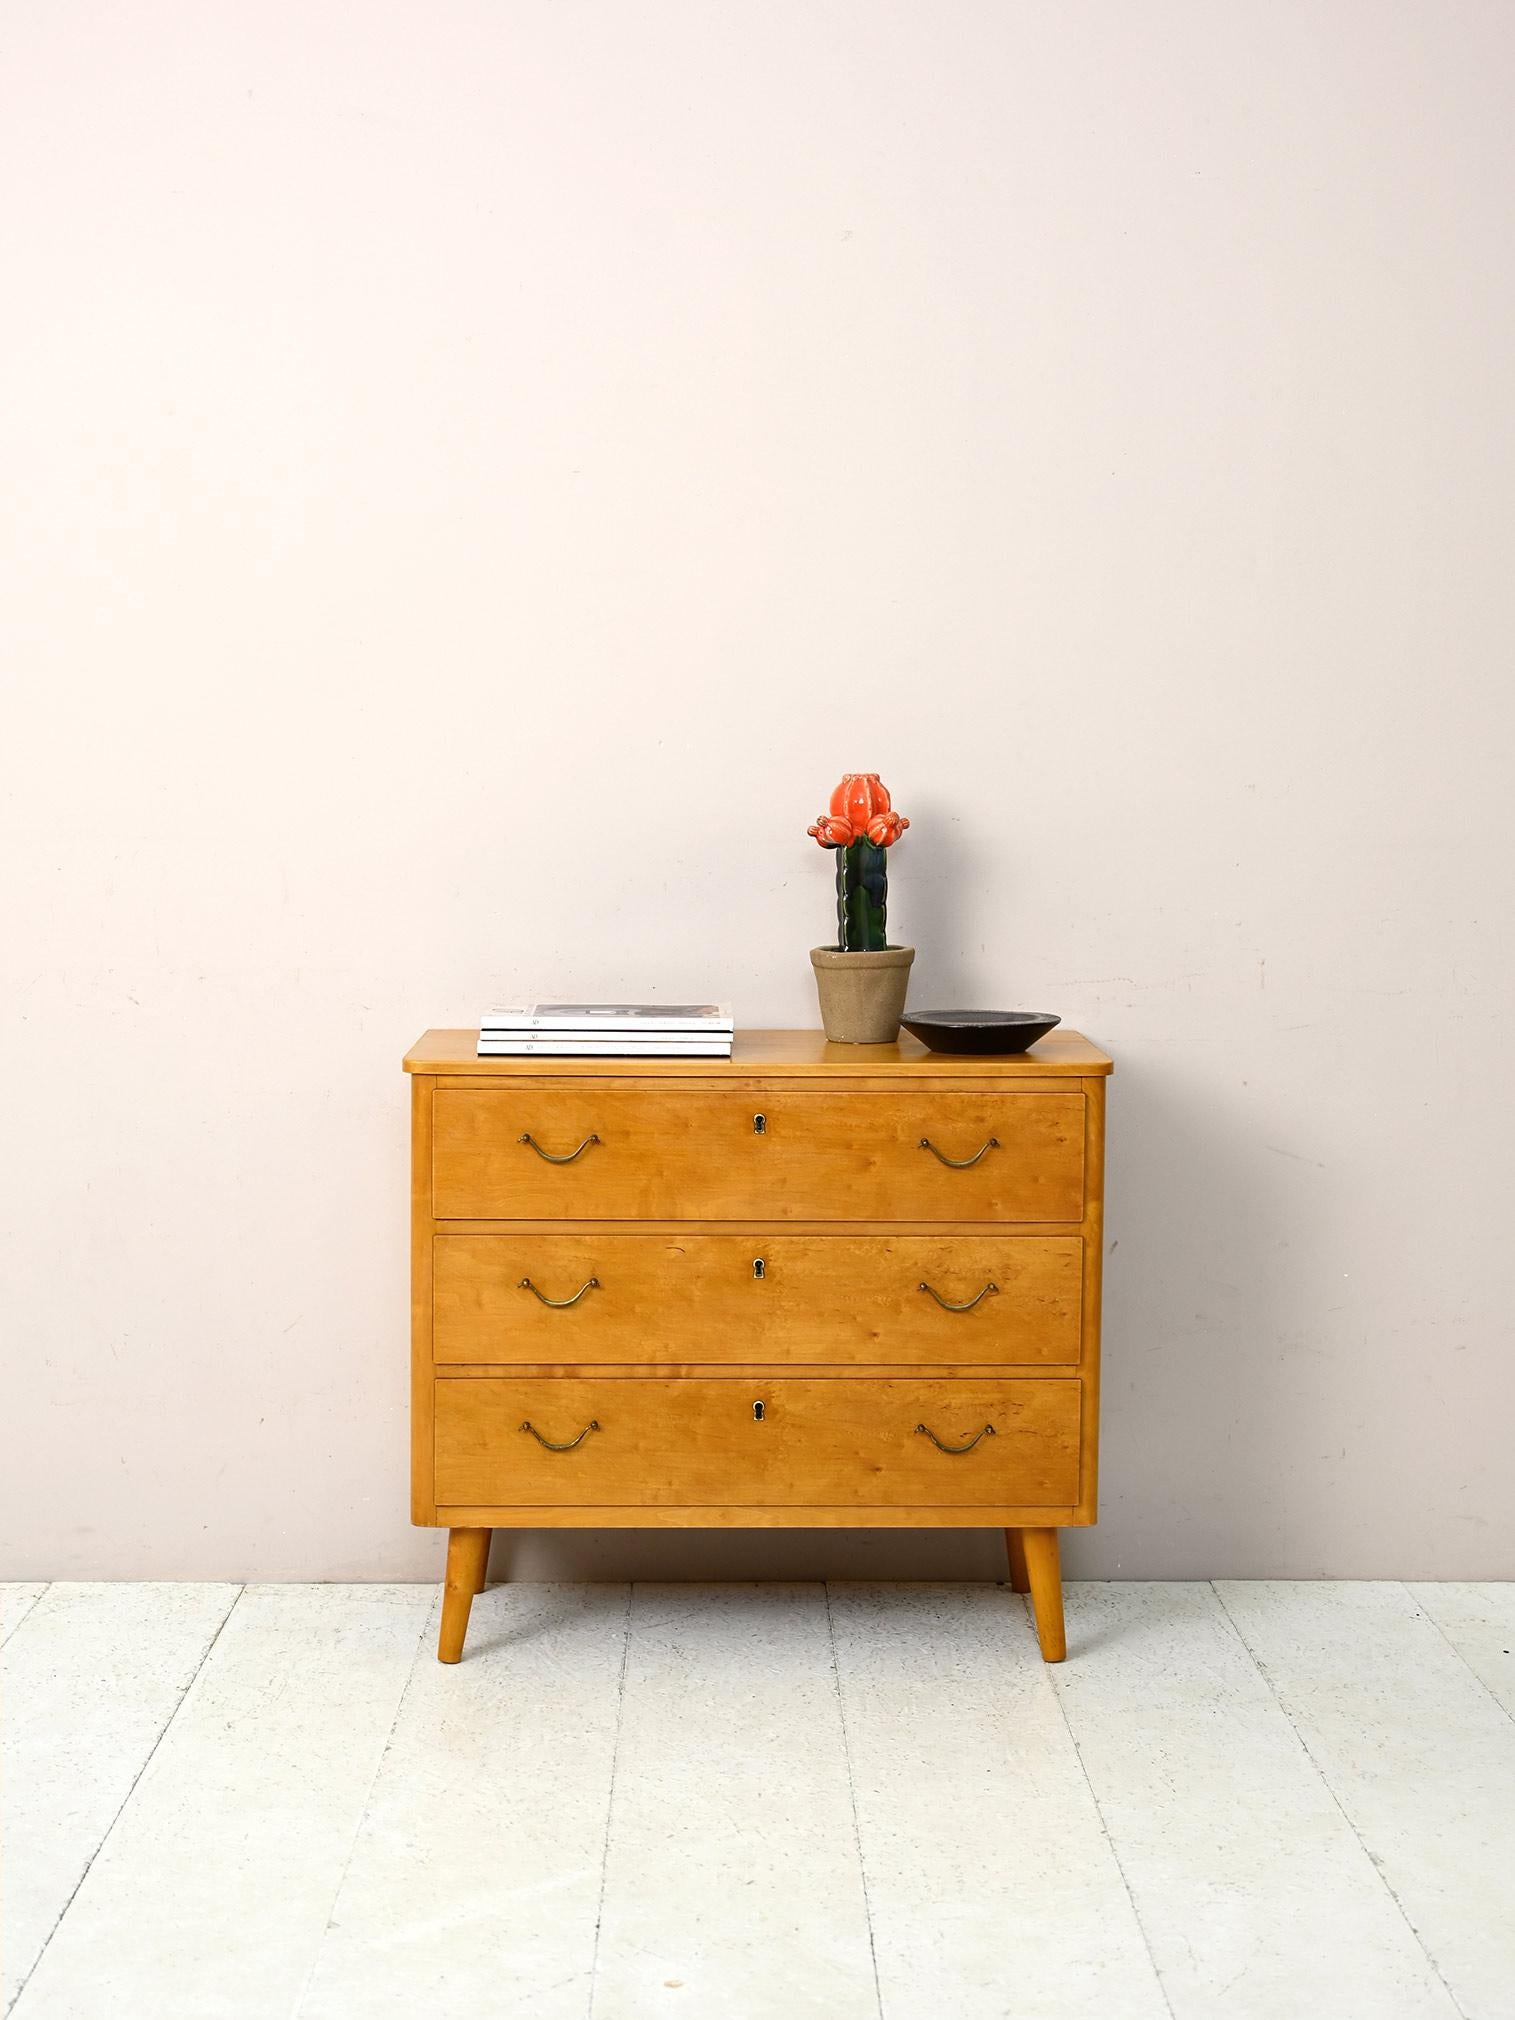 Vintage cabinet with three drawers and brass handles.

A piece of modern Scandinavian furniture with a retro feel.
The special burl wood, with its golden color and marked grain, makes this chest of drawers unique and original.
The detail of the